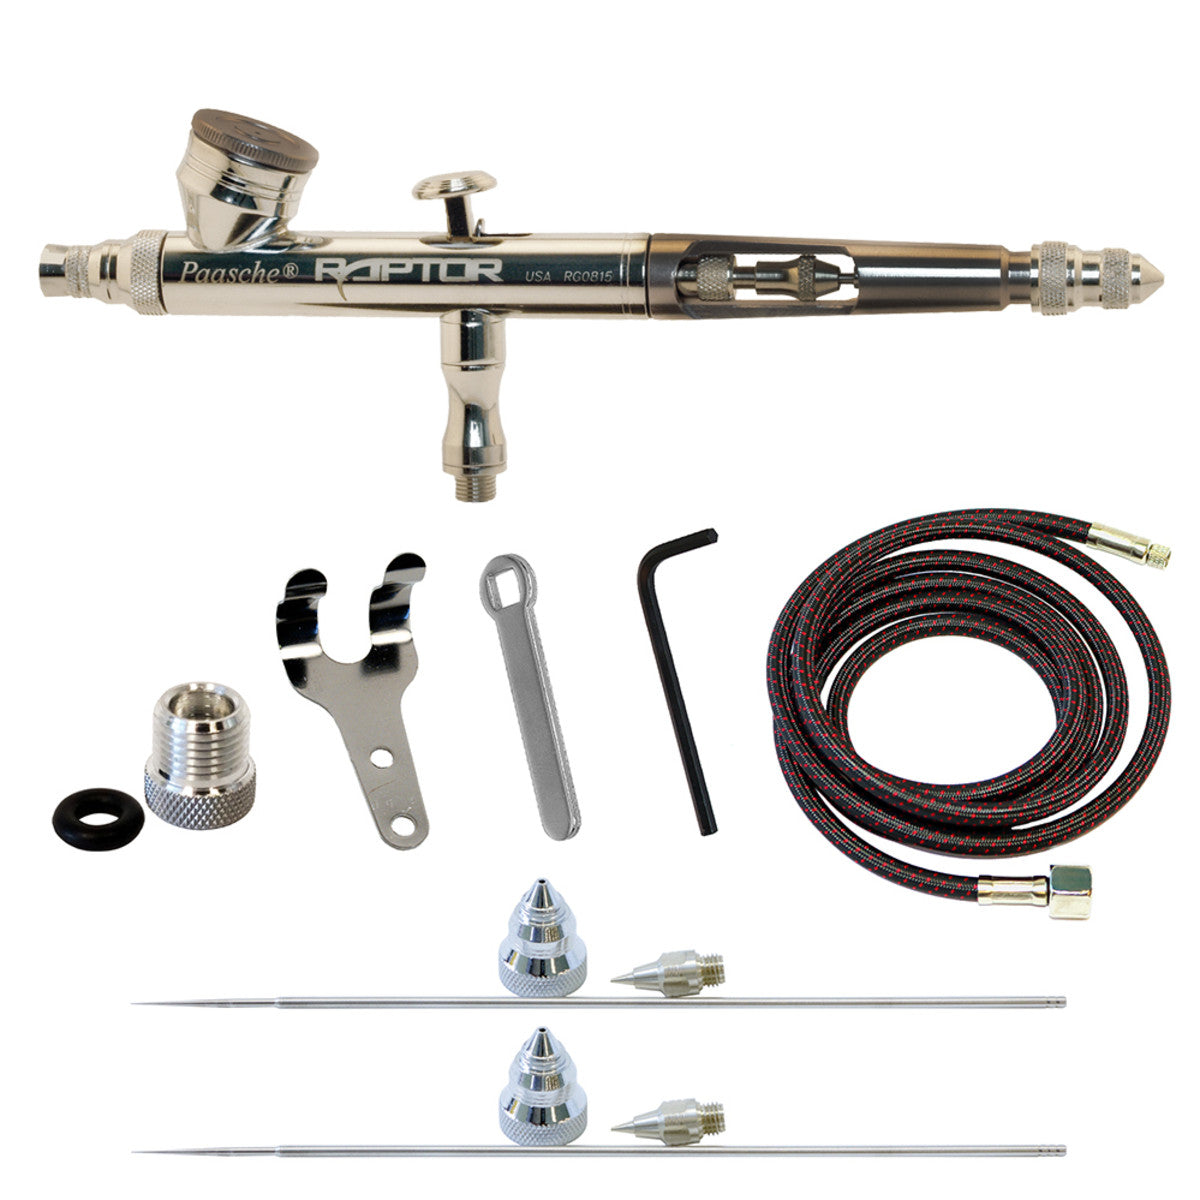 Paasche Airbrush Kit Double Action Gravity Feed Wooden Case, Includes 3  Head Sizes (.25mm.38mm, and 66mm), All-Inclusive Airbrush for Artists